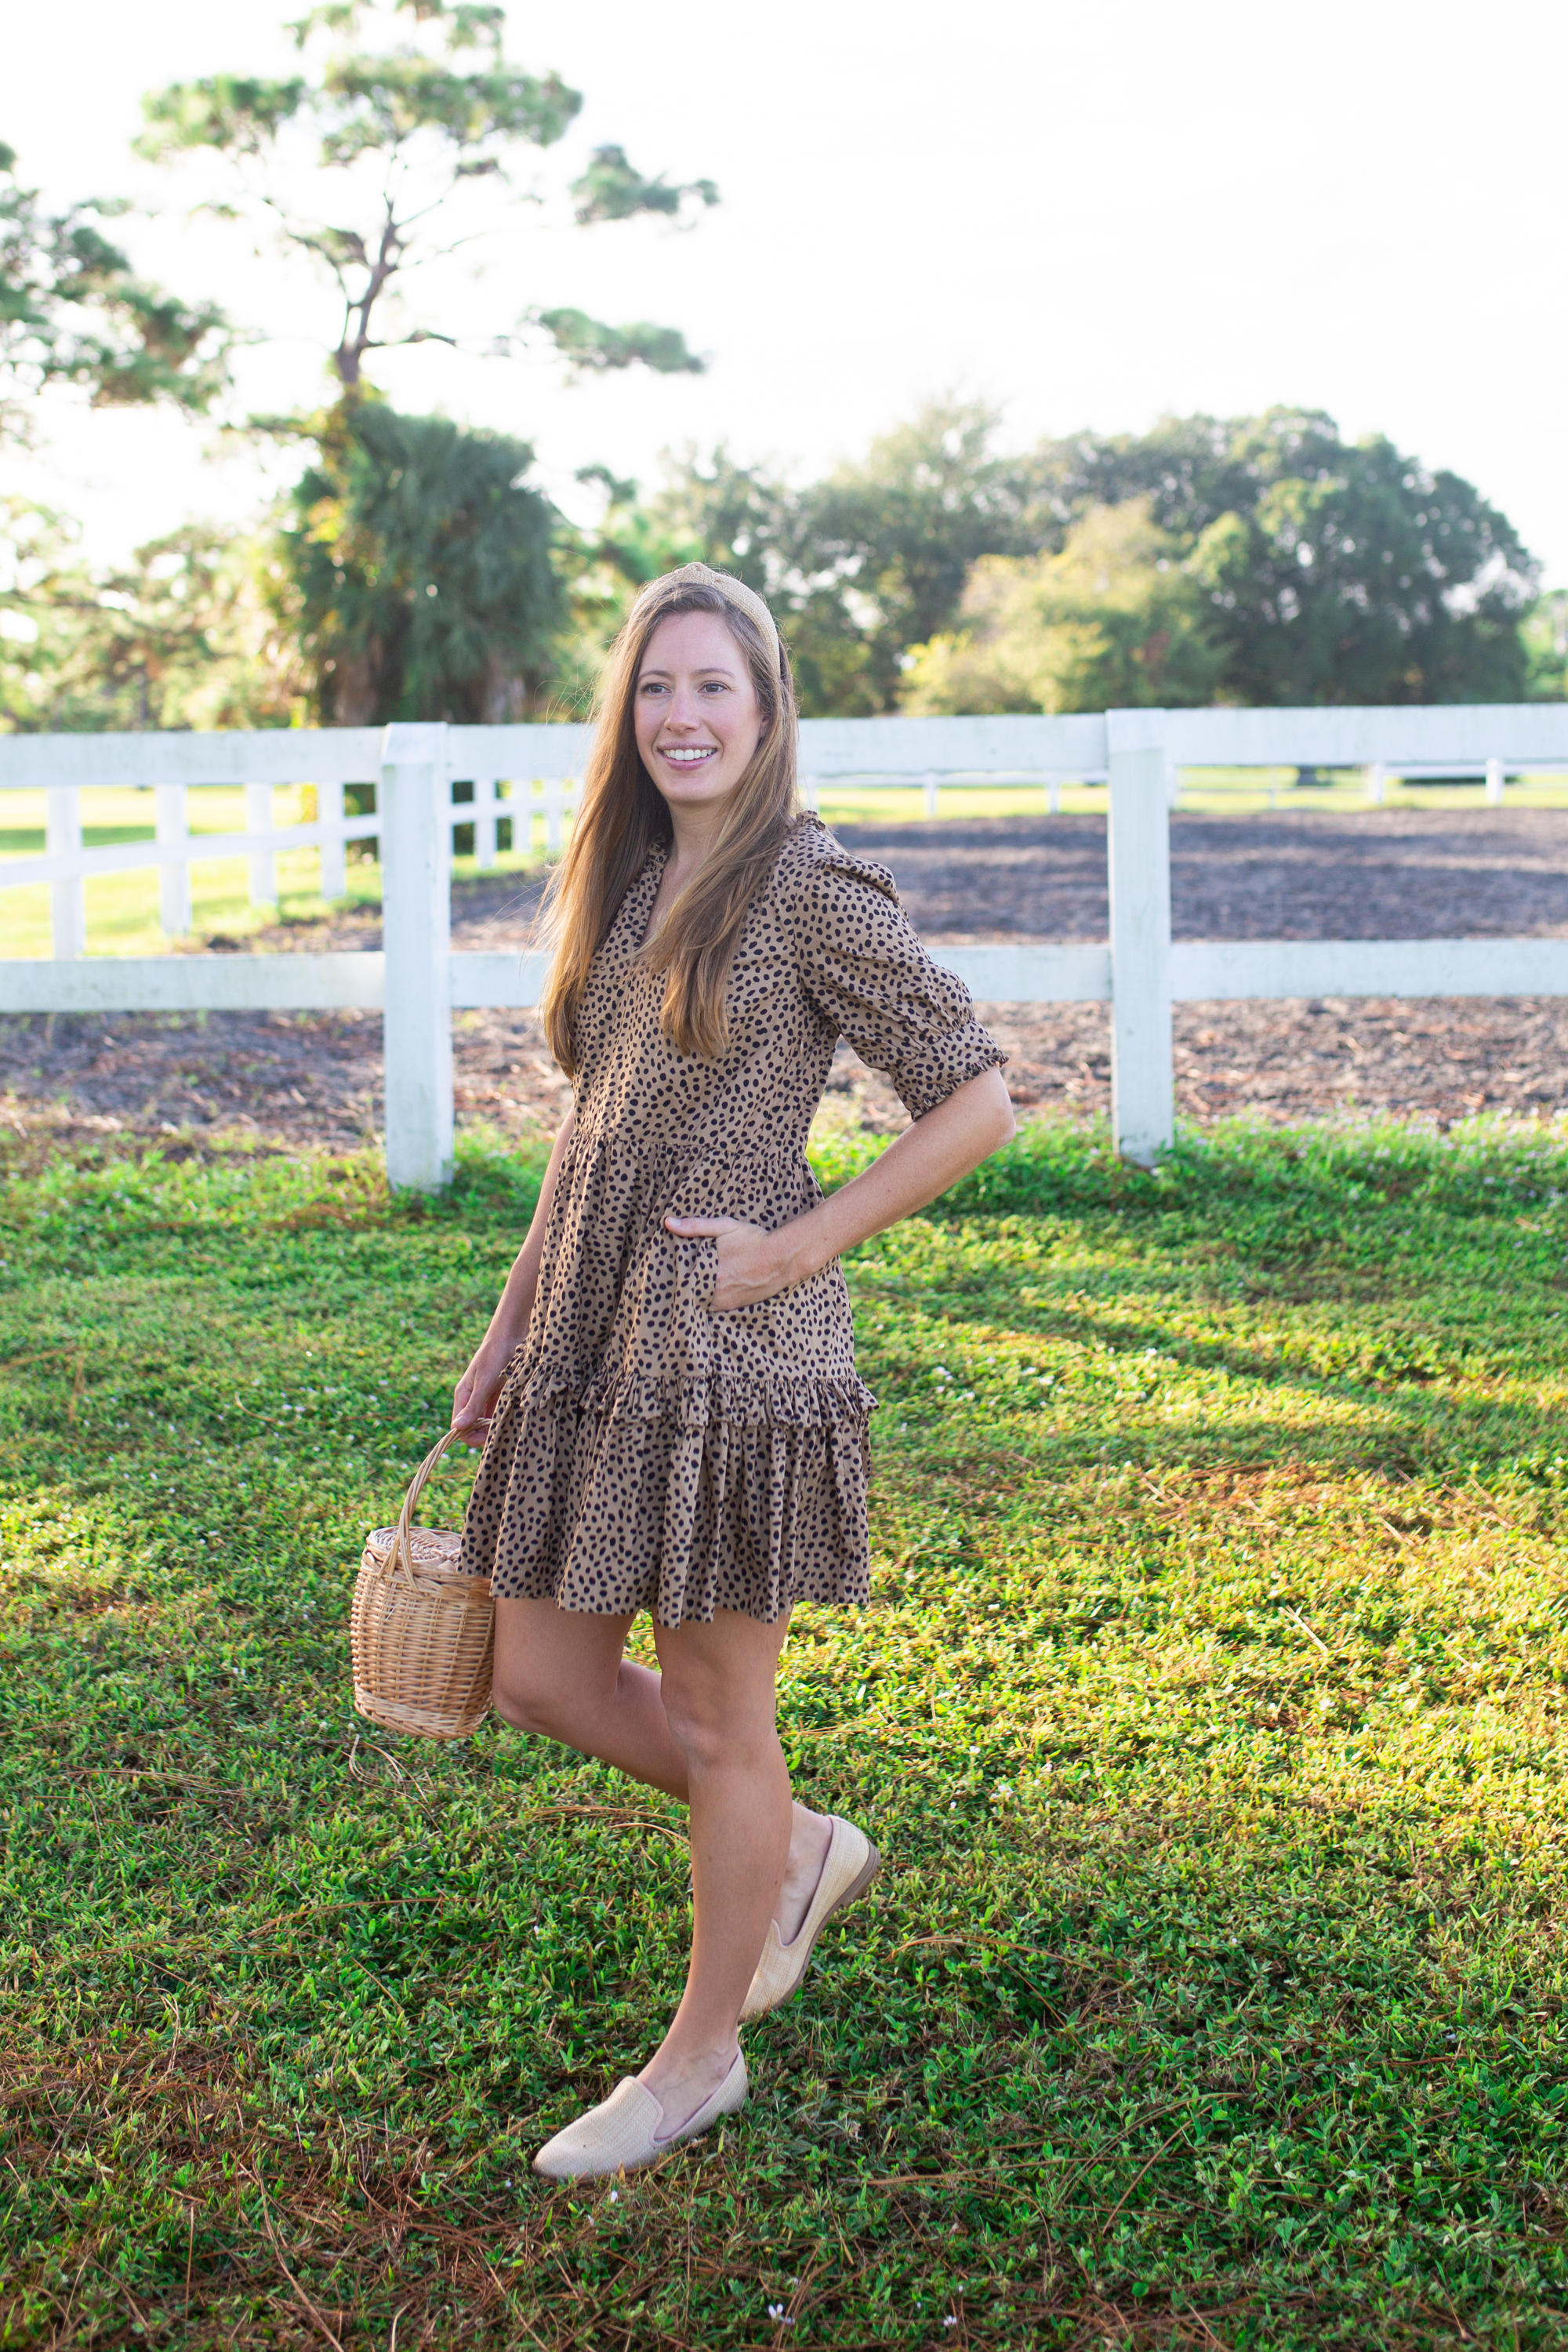 Leopard Print Dress / How to Style a Leopard Dress for Fall / Fall Outfit Idea / Casual Fall Outfit / Autumn Outfits / Leopard Print Dress Outfit Fall - Sunshine Style, A Florida Fashion and Lifestyle Blog by Katie